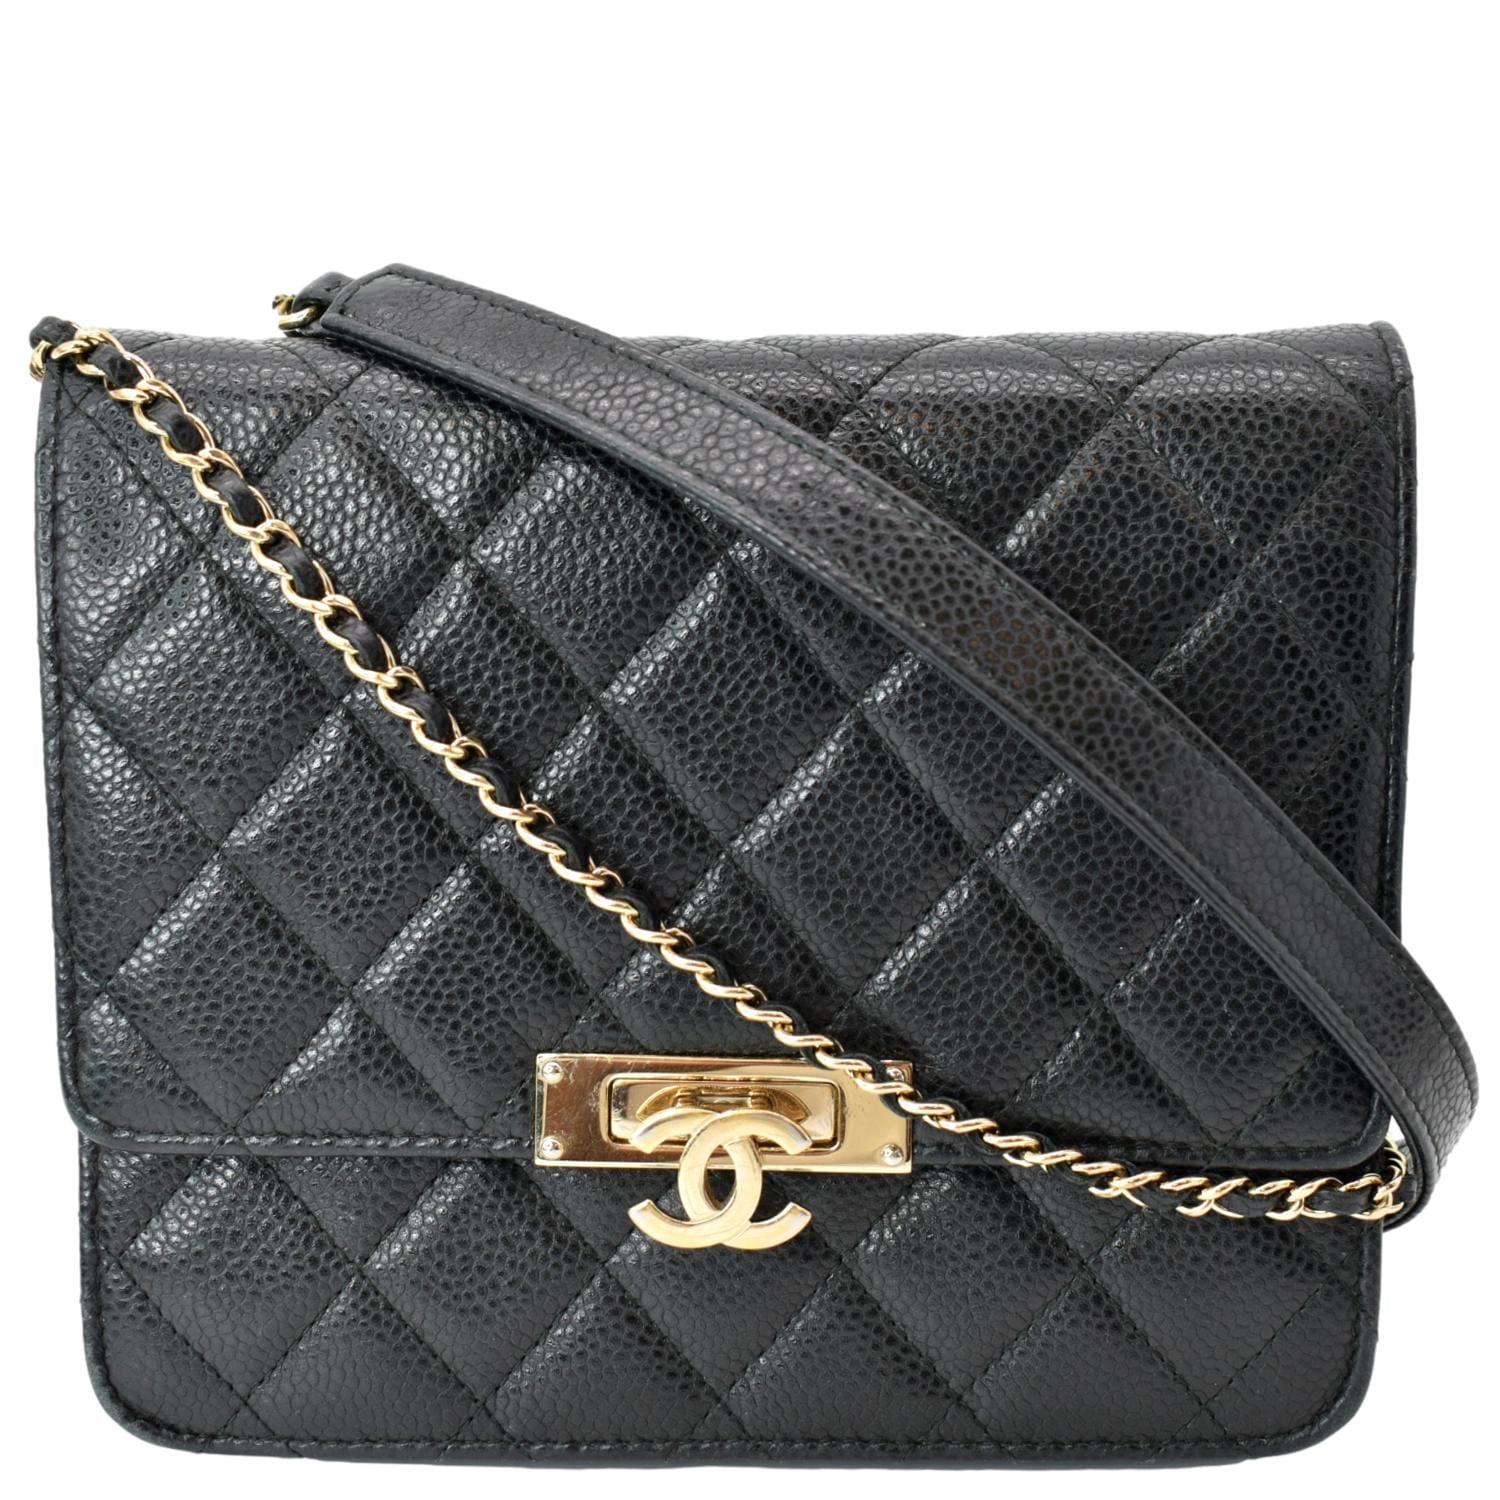 Chanel Wallet On Chain Golden Class Small WOC